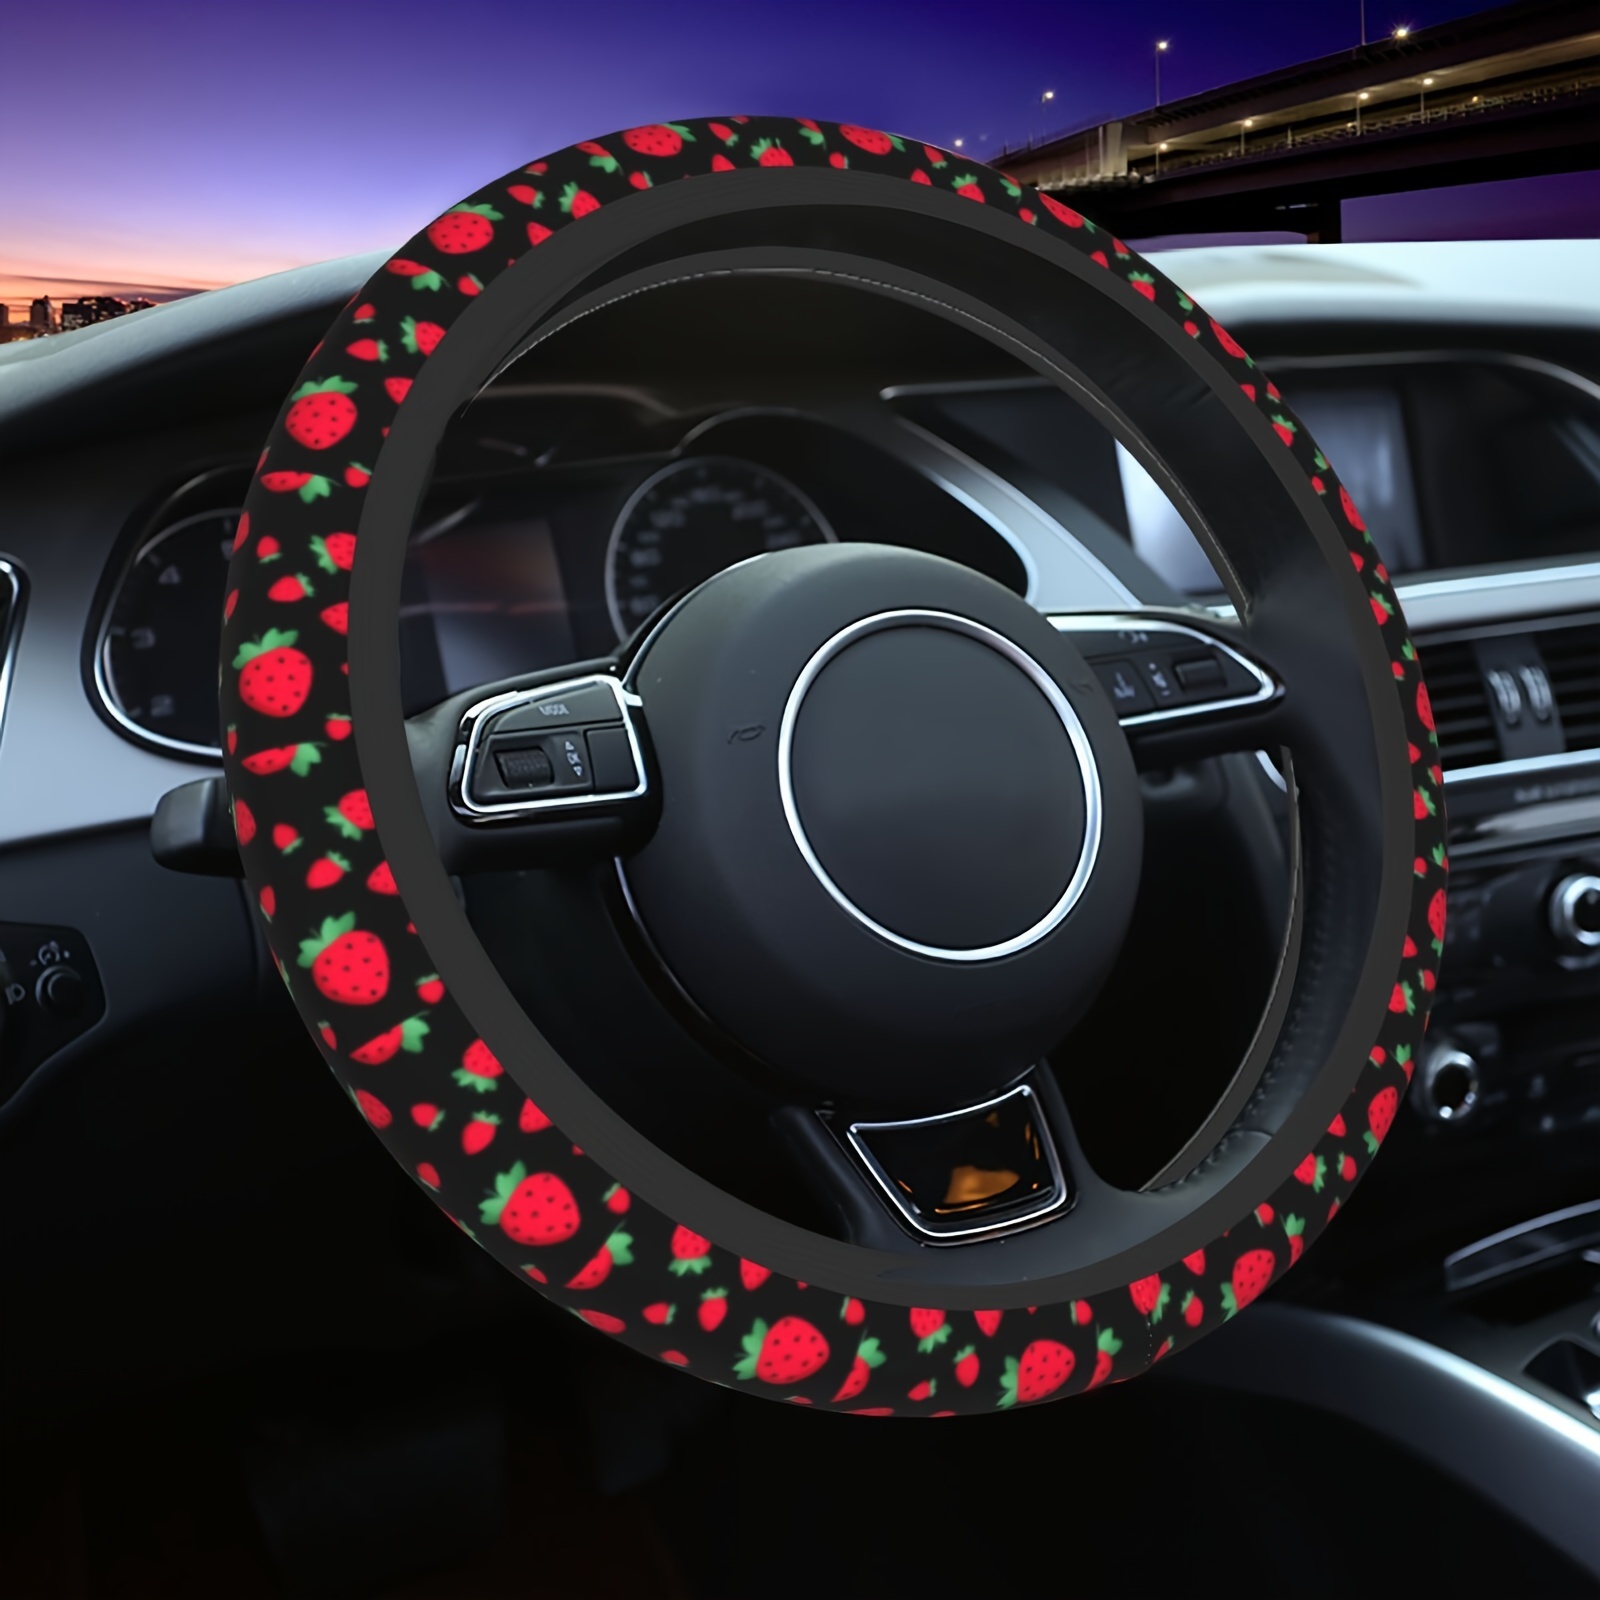 

1pc Red Strawberry Print Car Steering Wheel Cover - Universal Car Accessory For Diverse Cars, Waterproof And Dustproof Steering Wheel Protector Suitable For Women